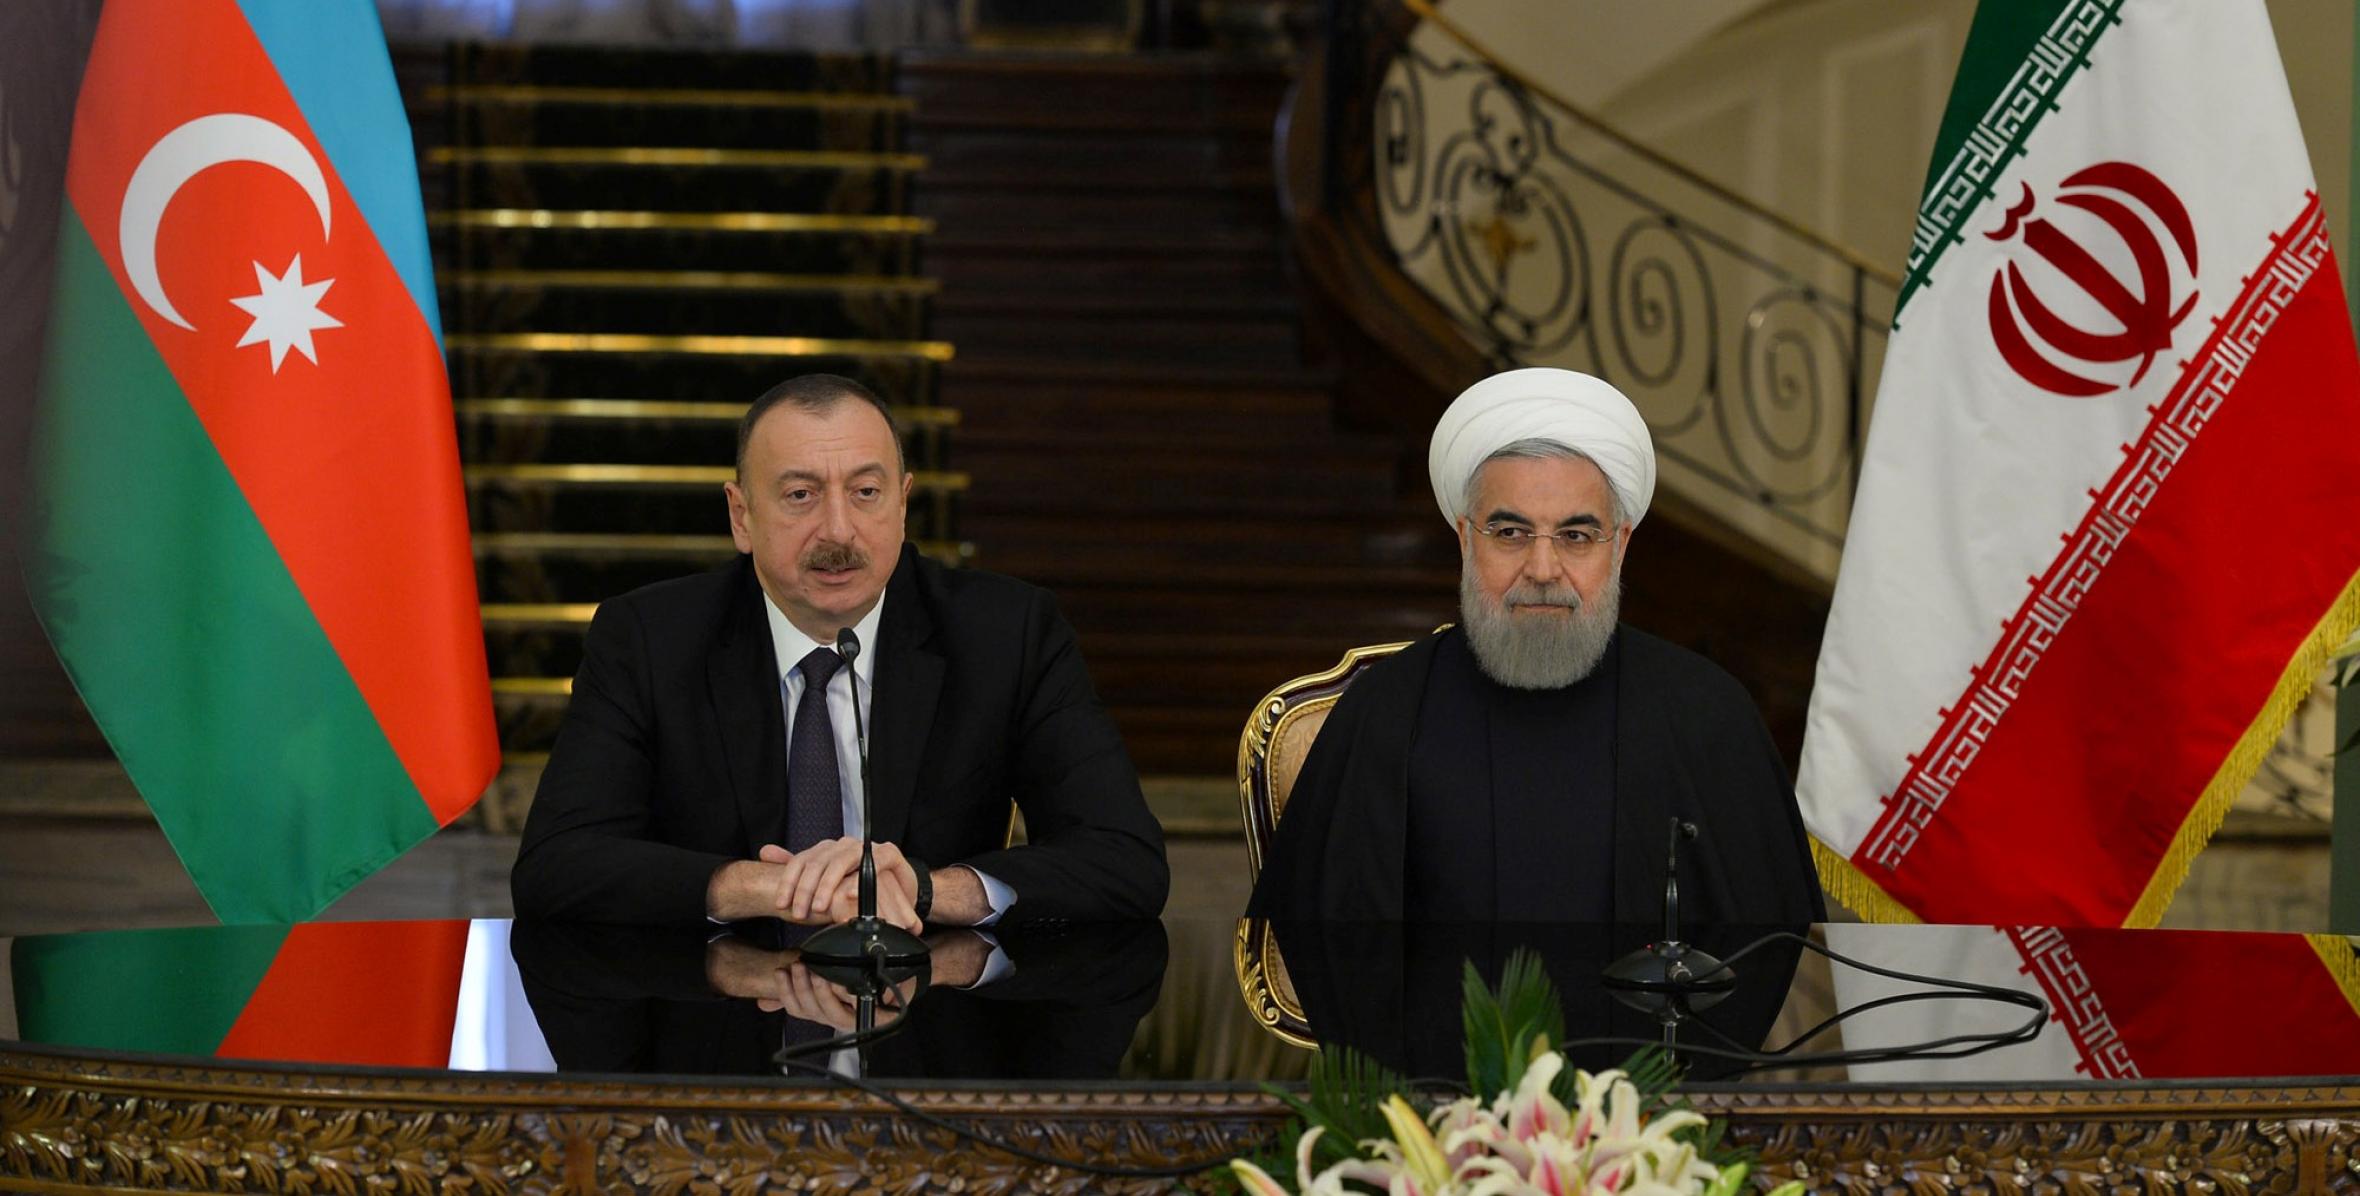 Presidents of Azerbaijan and Iran made statements for the press